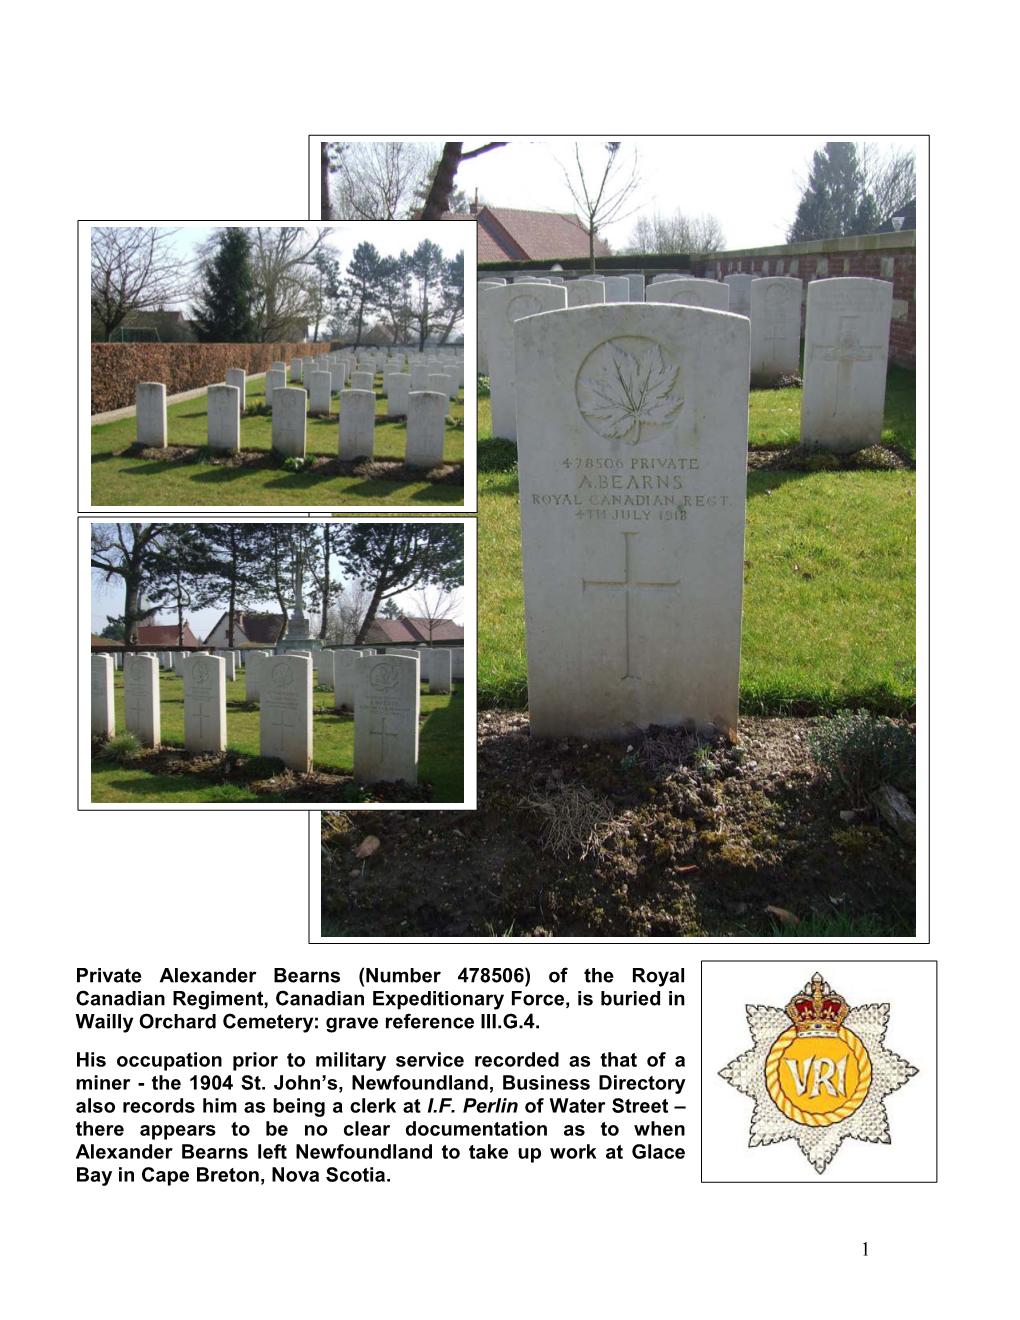 Private Alexander Bearns (Number 478506) of the Royal Canadian Regiment, Canadian Expeditionary Force, Is Buried in Wailly Orchard Cemetery: Grave Reference III.G.4